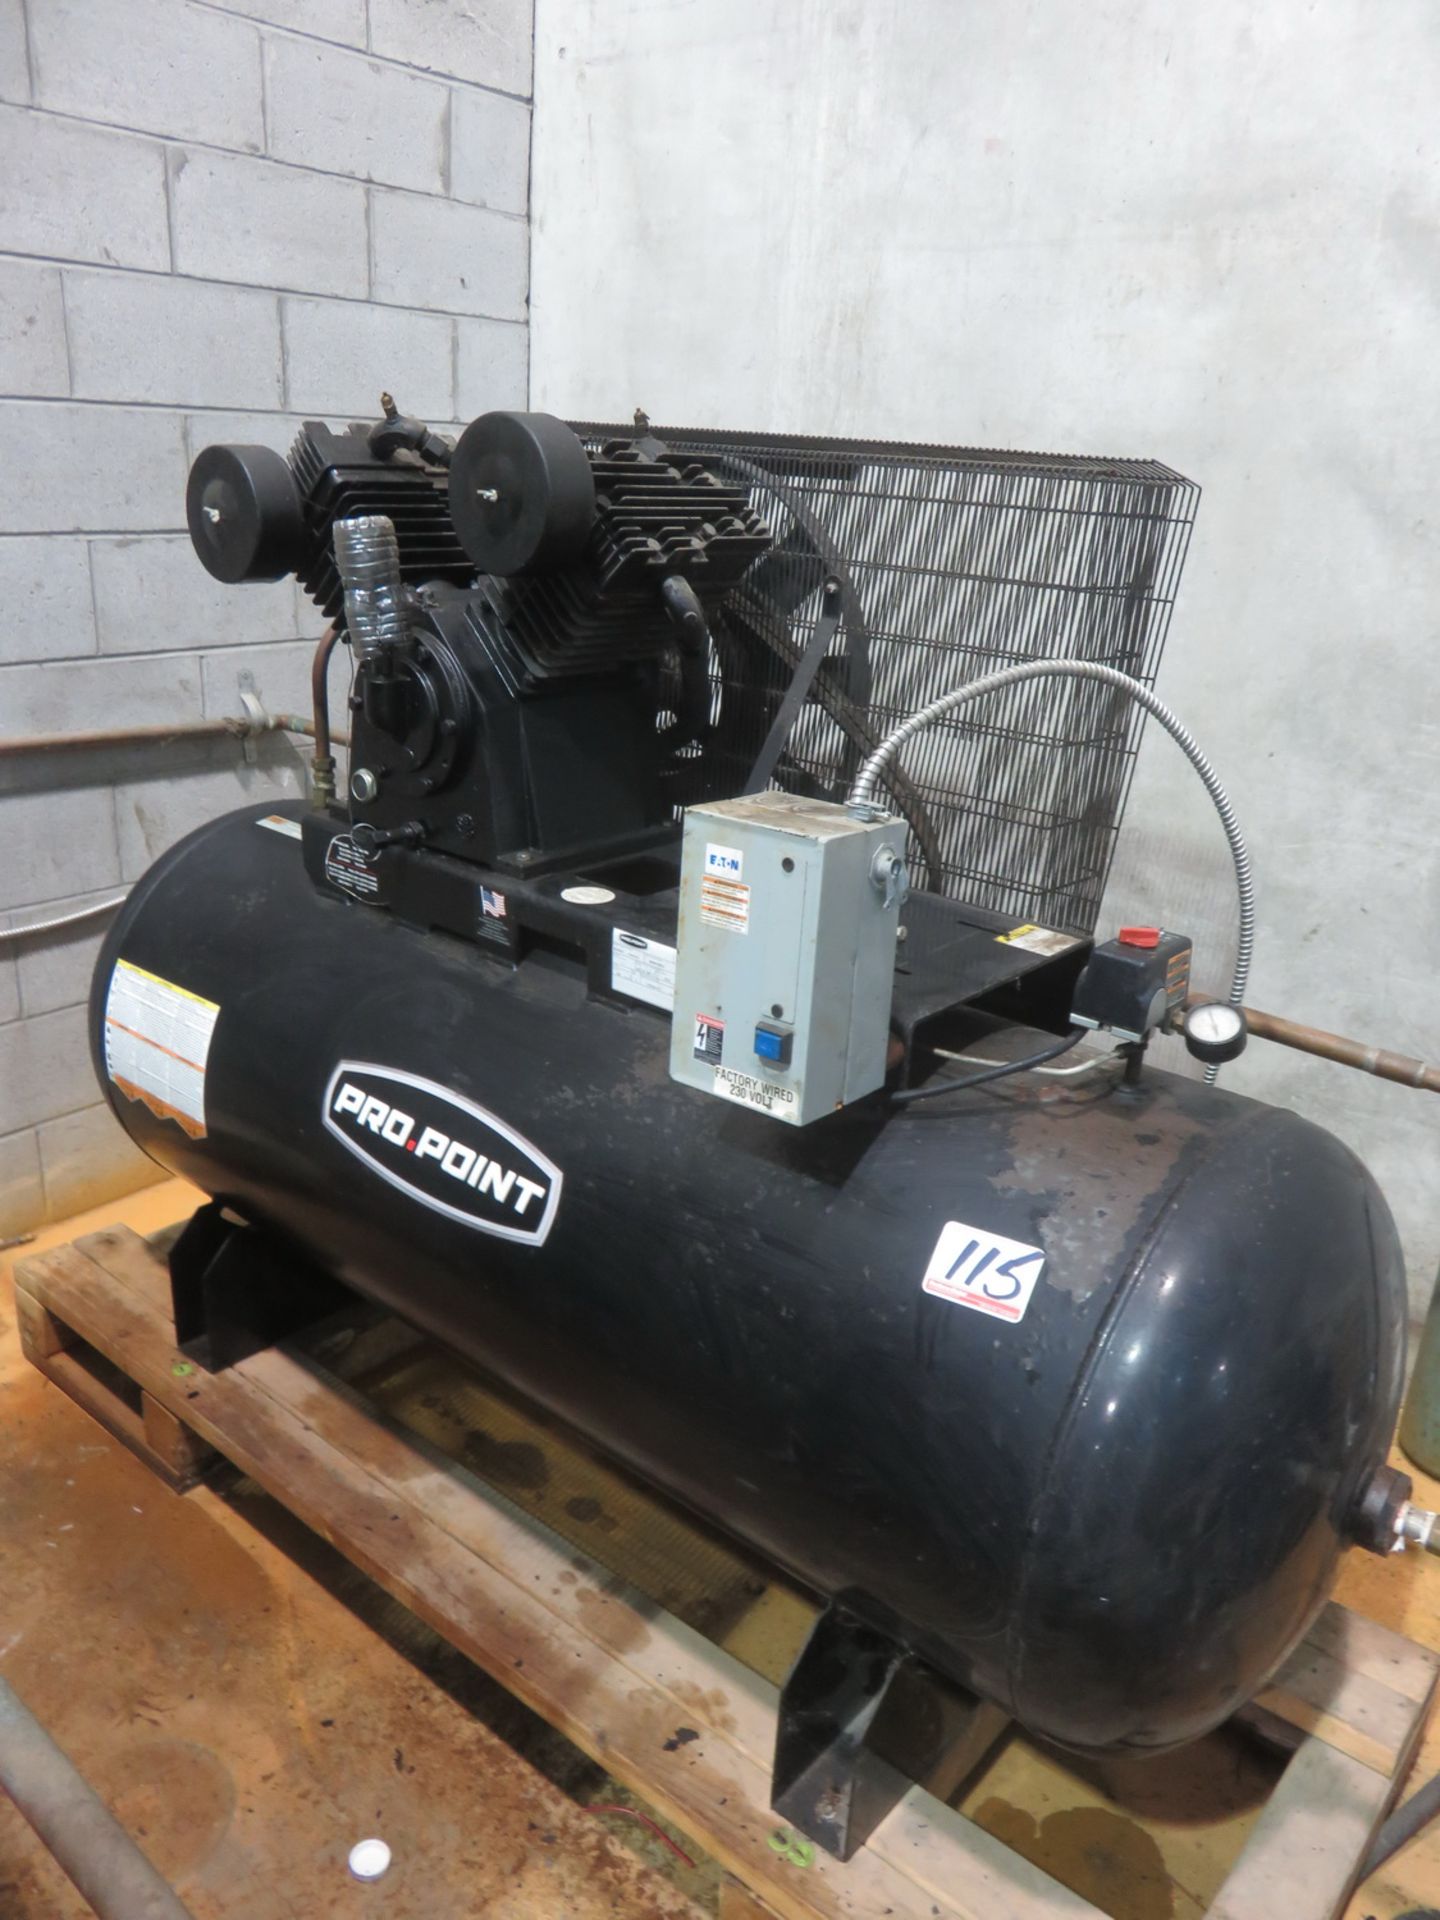 PRO-POINT MODEL 8475022 120-GALLON, 2-STAGE, TANK MOUNT HORIZONTAL AIR COMPRESSOR (MISSING MOTOR)